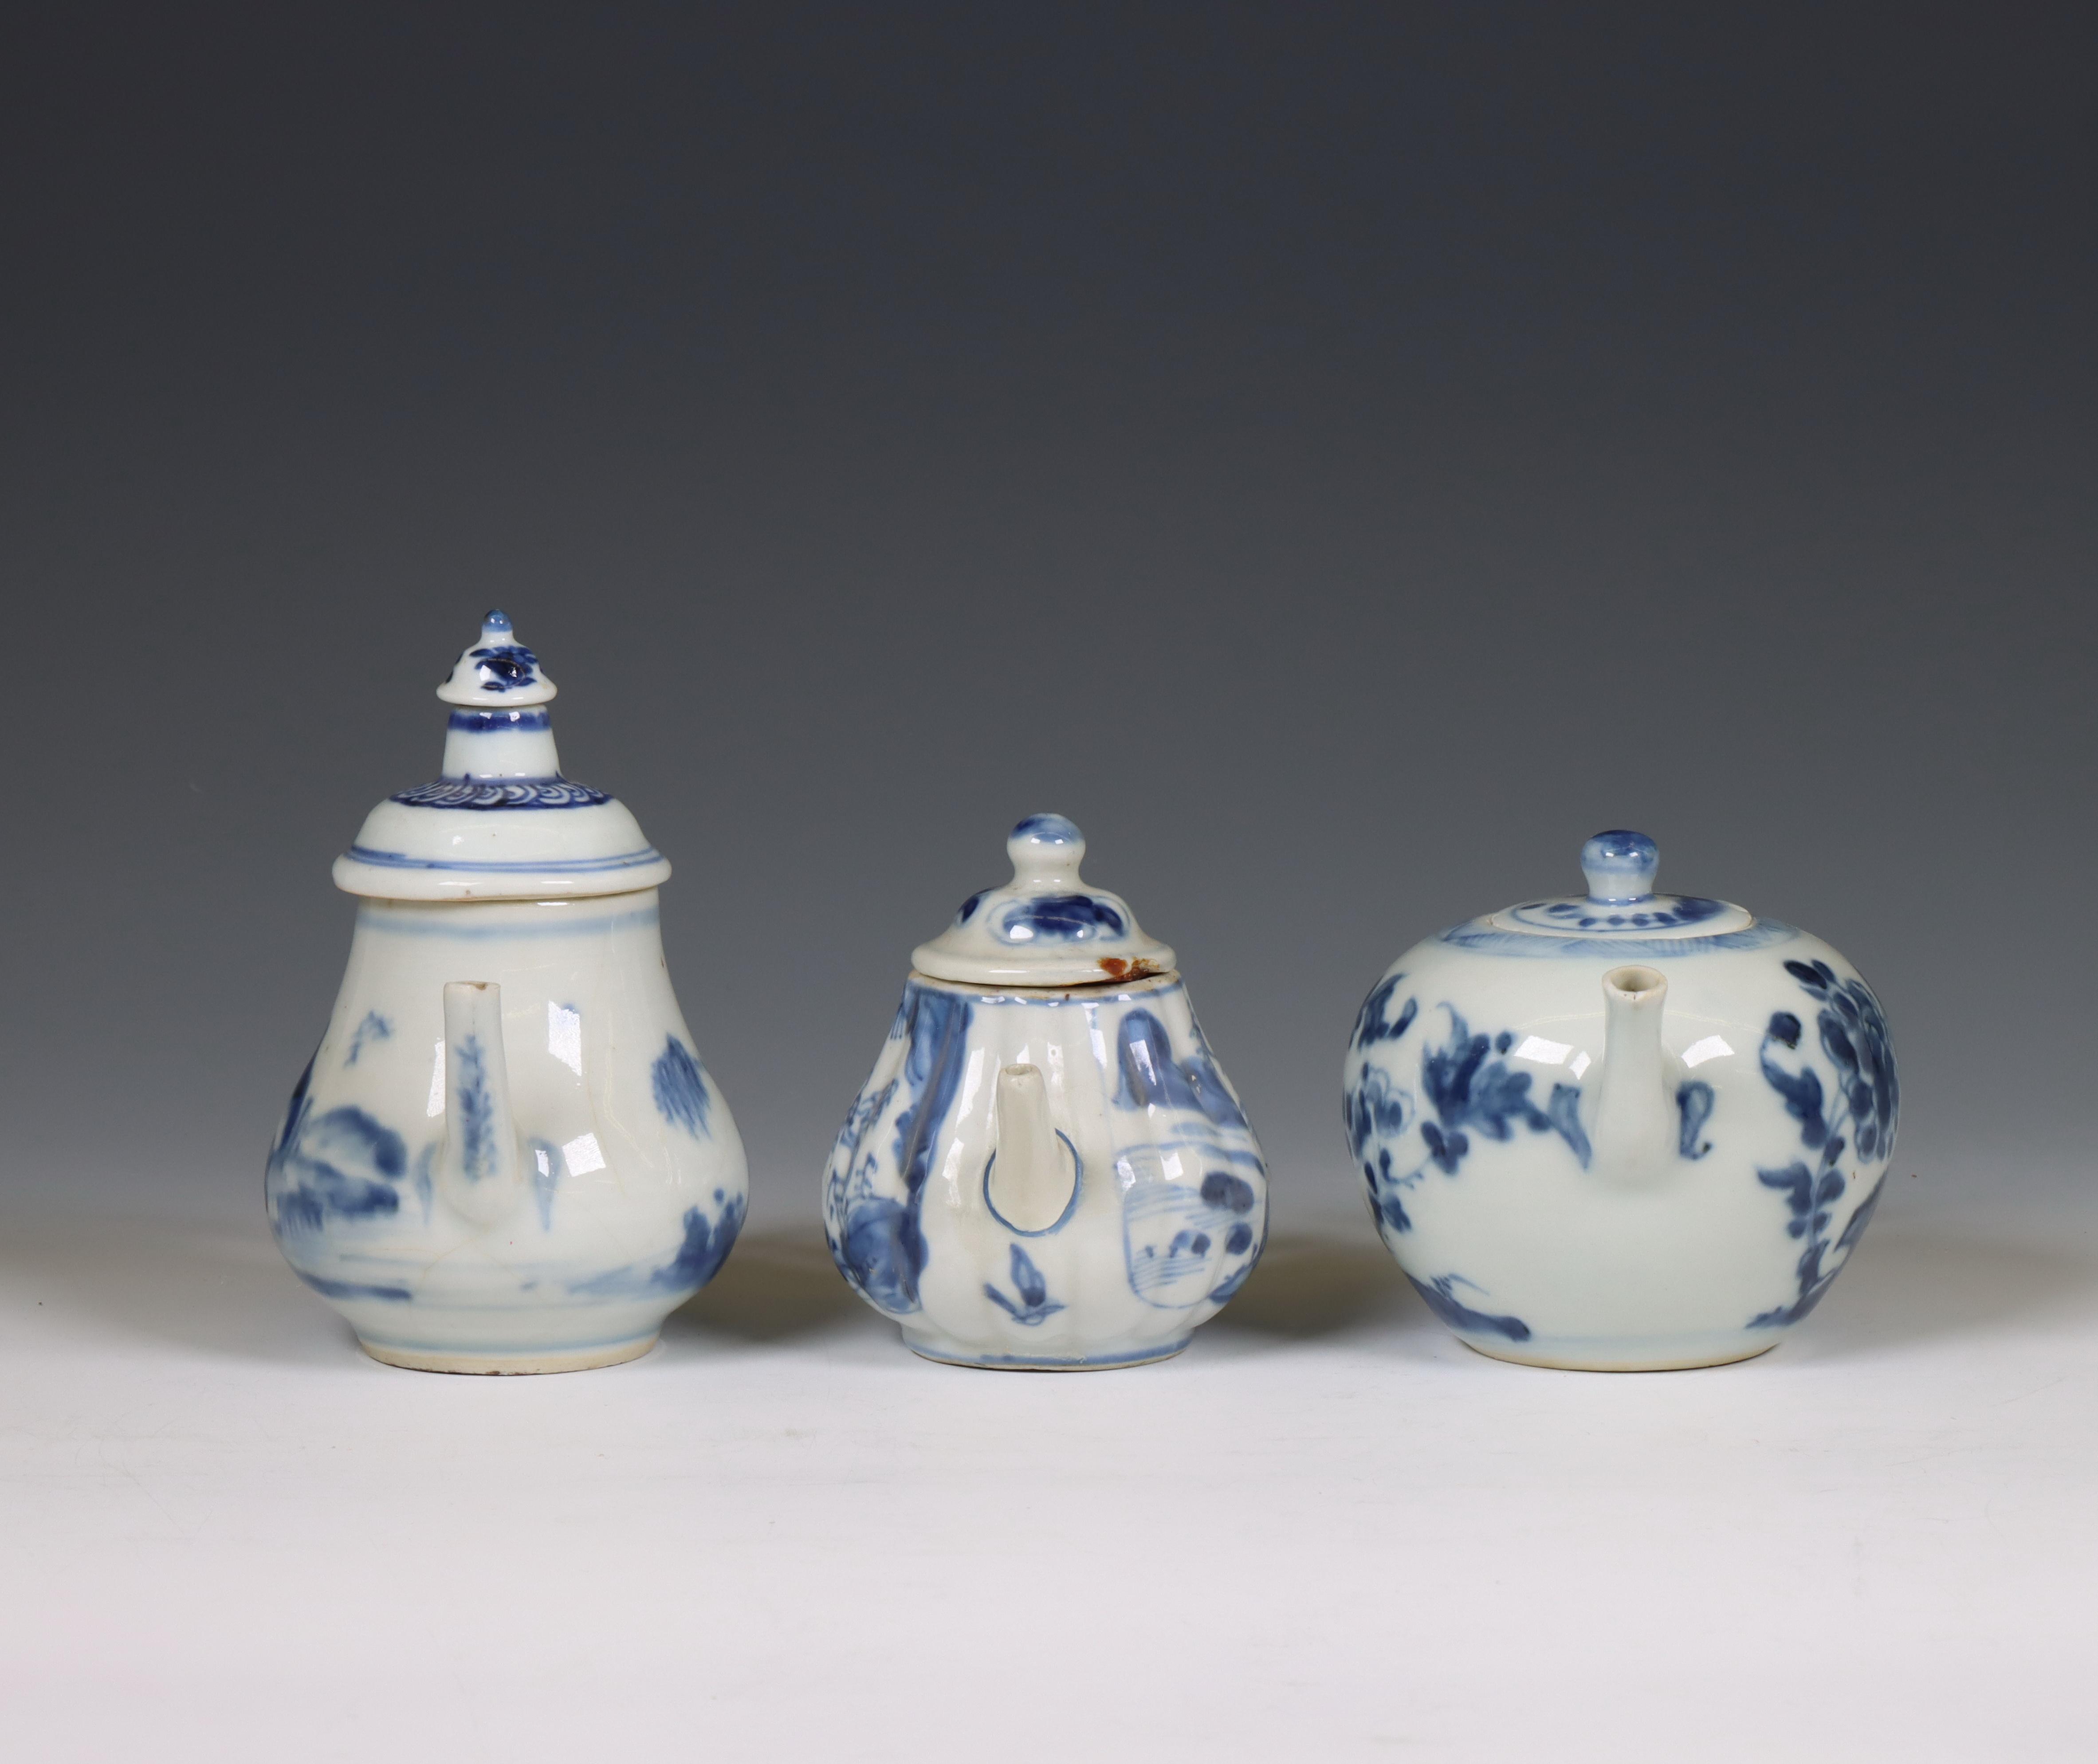 China, three blue and white porcelain teapots, 18th century, - Image 3 of 6